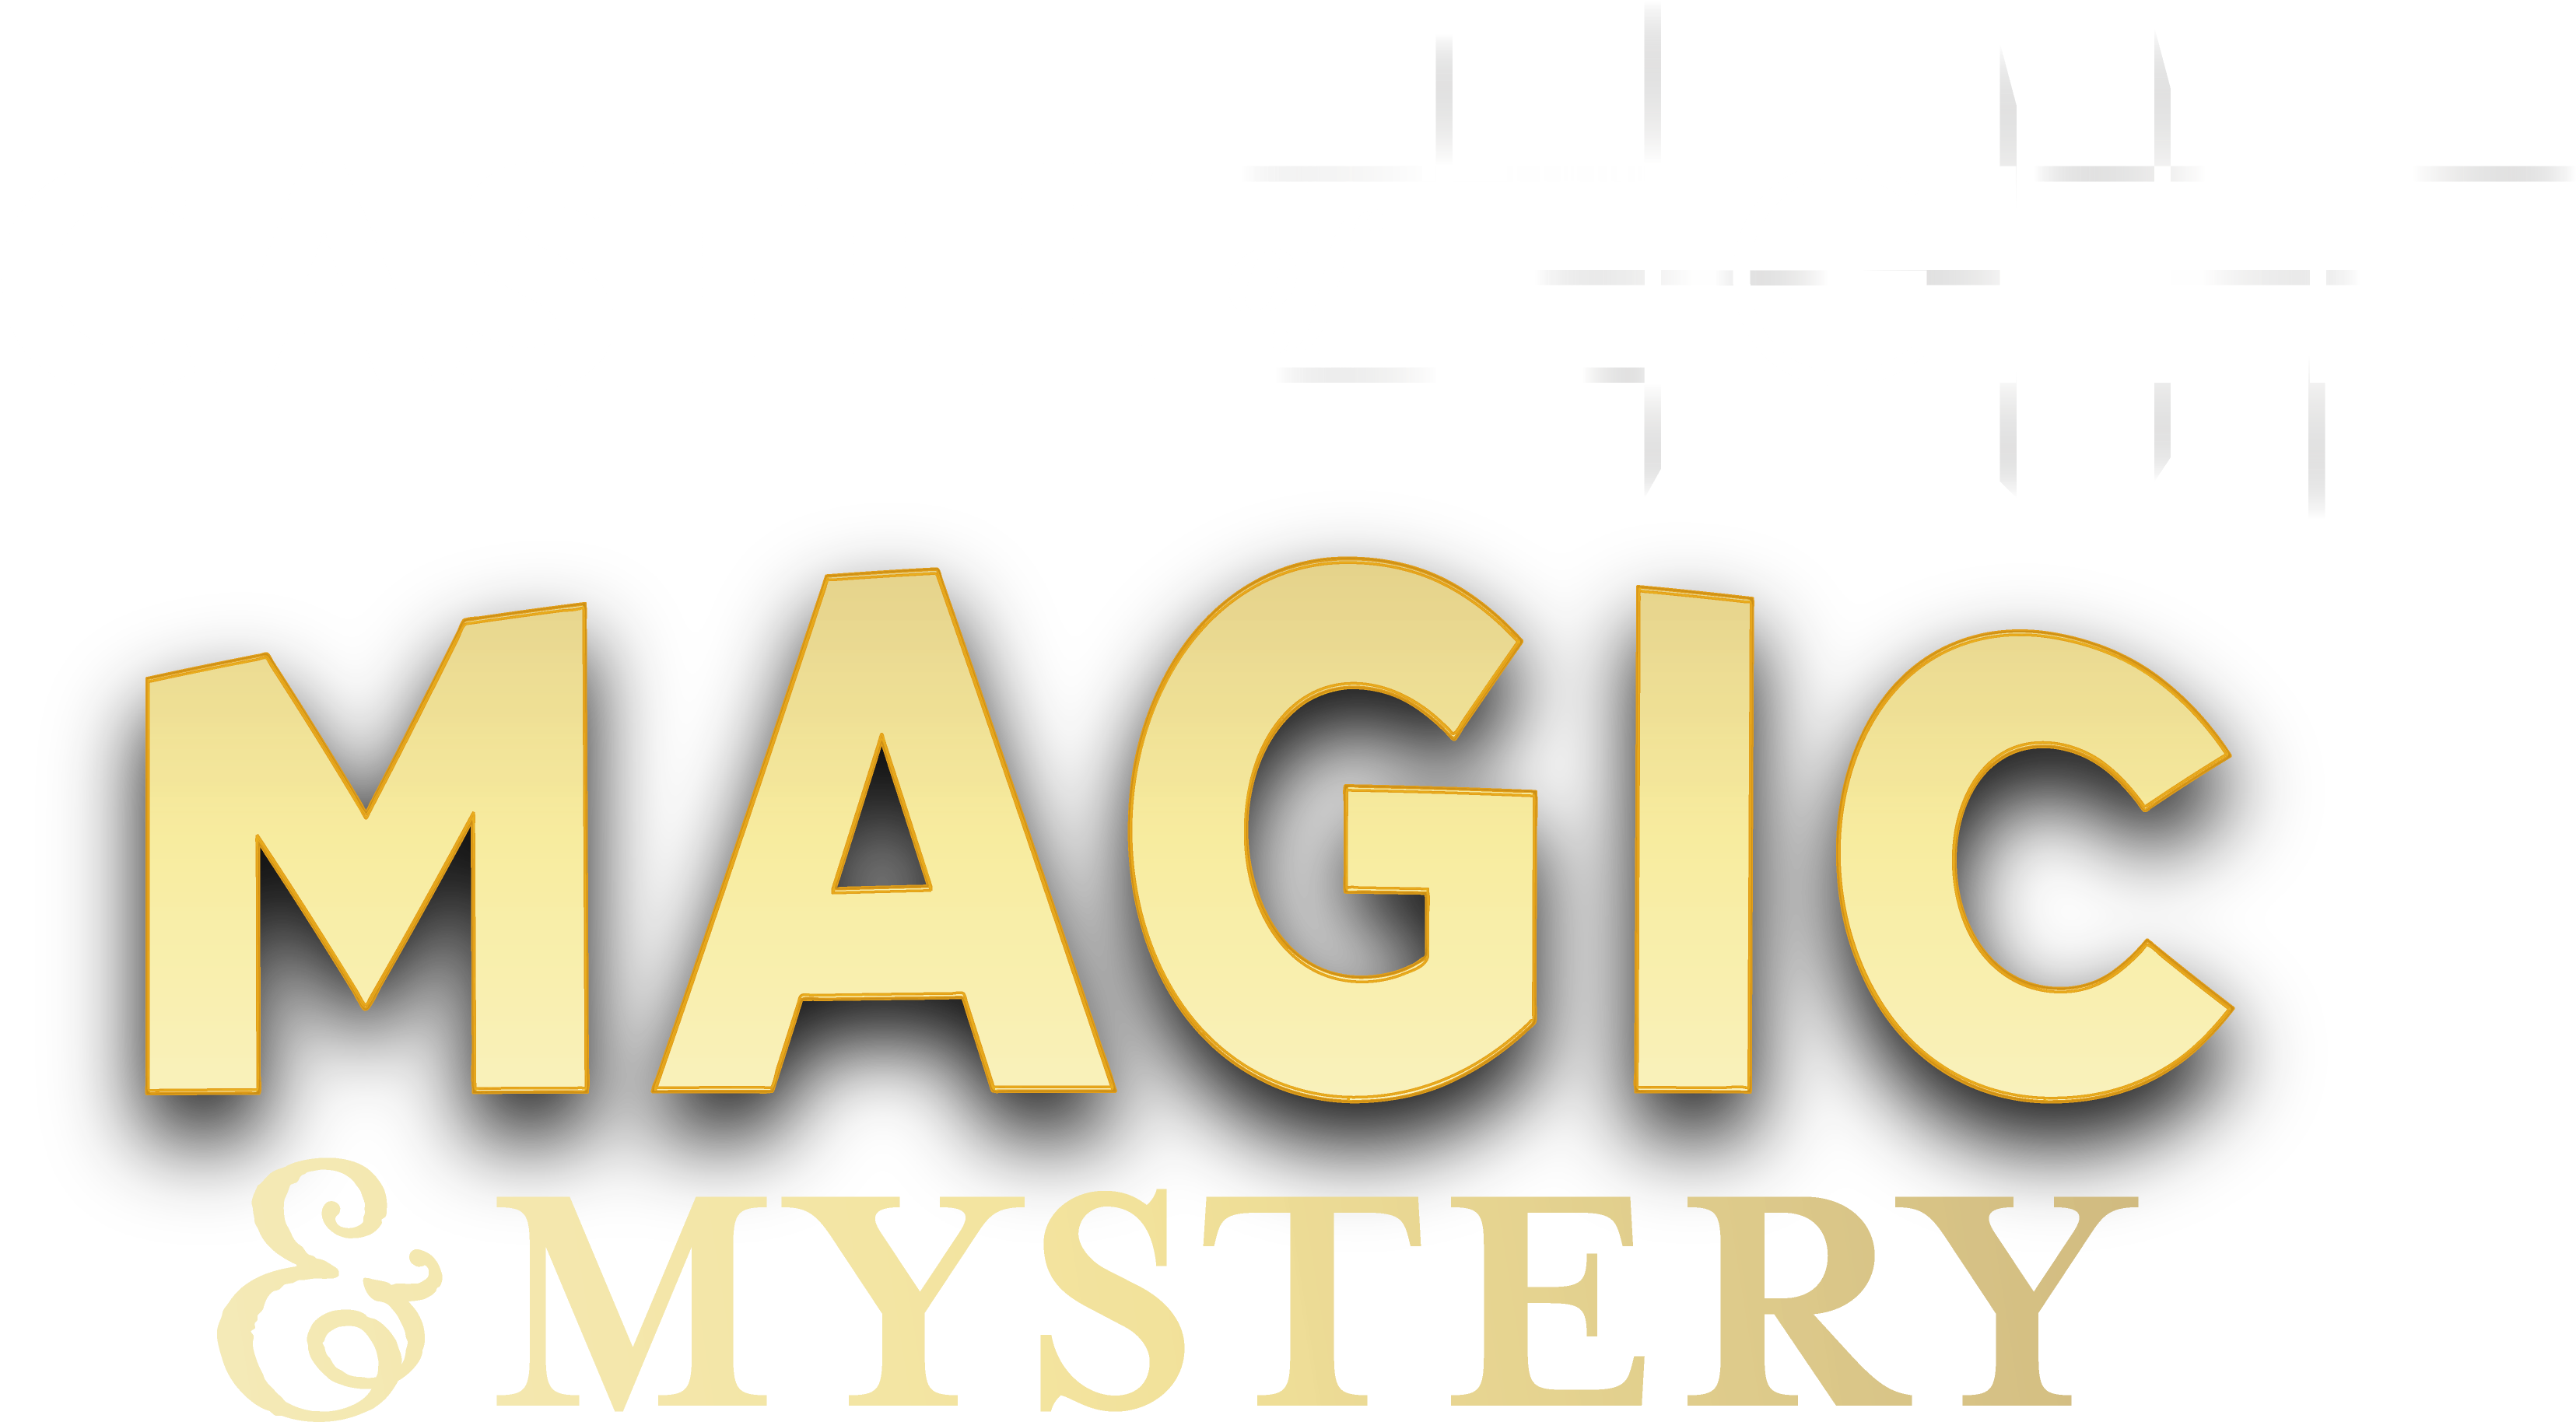 Castle of Light logo text only